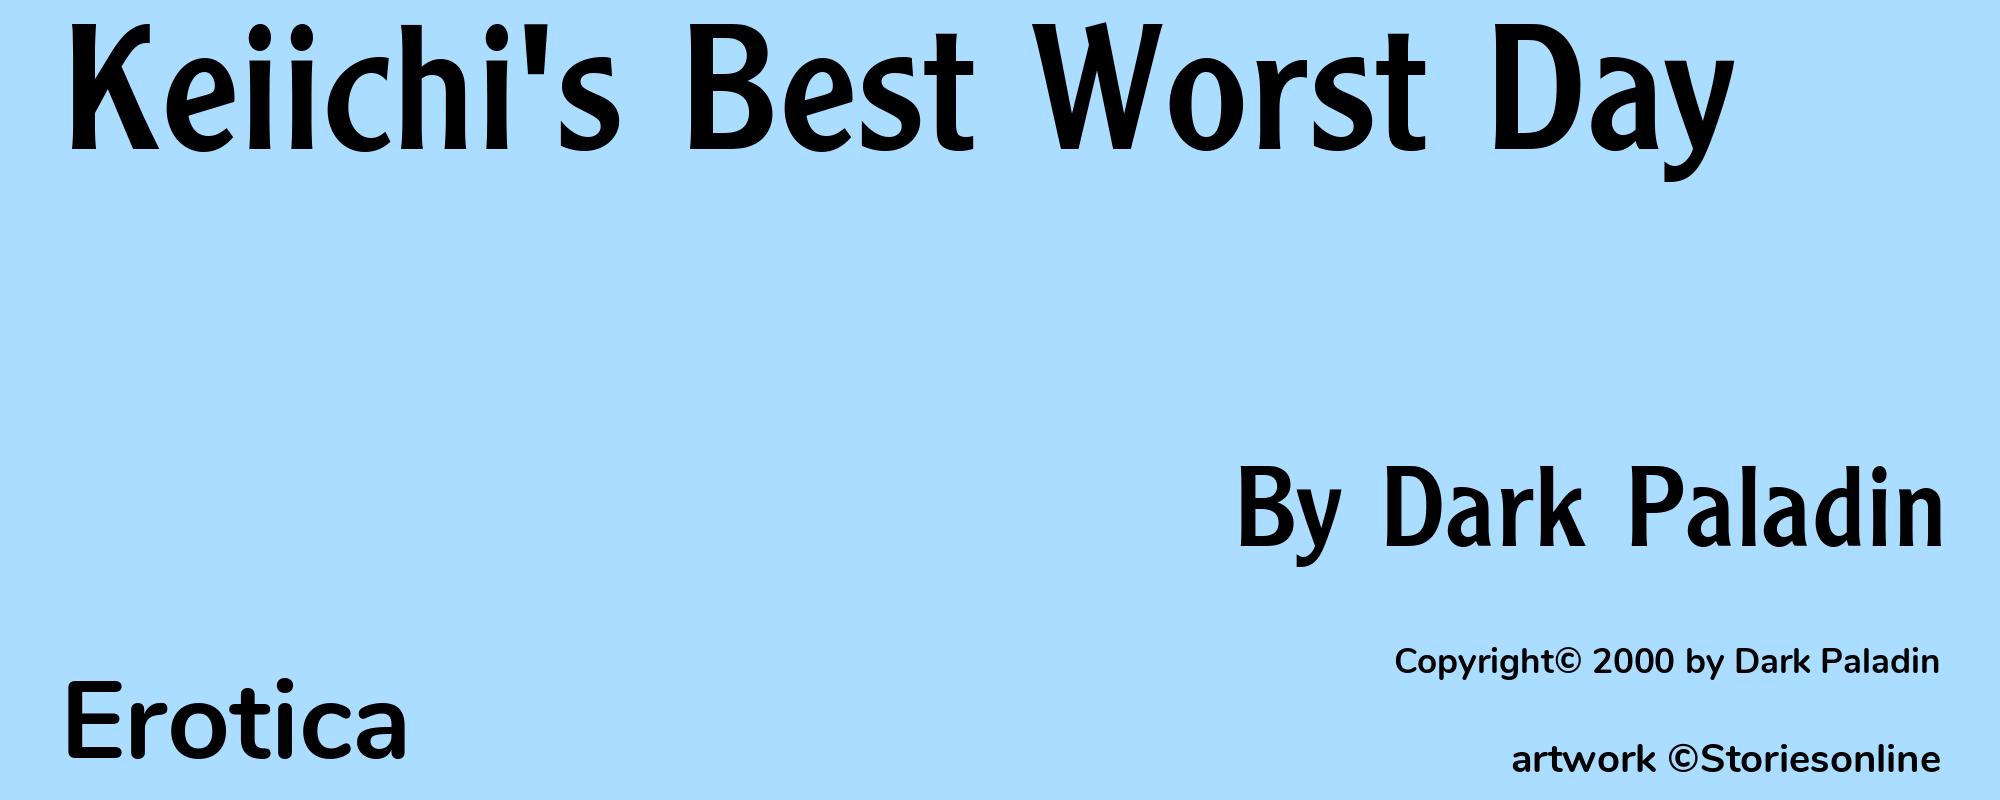 Keiichi's Best Worst Day - Cover